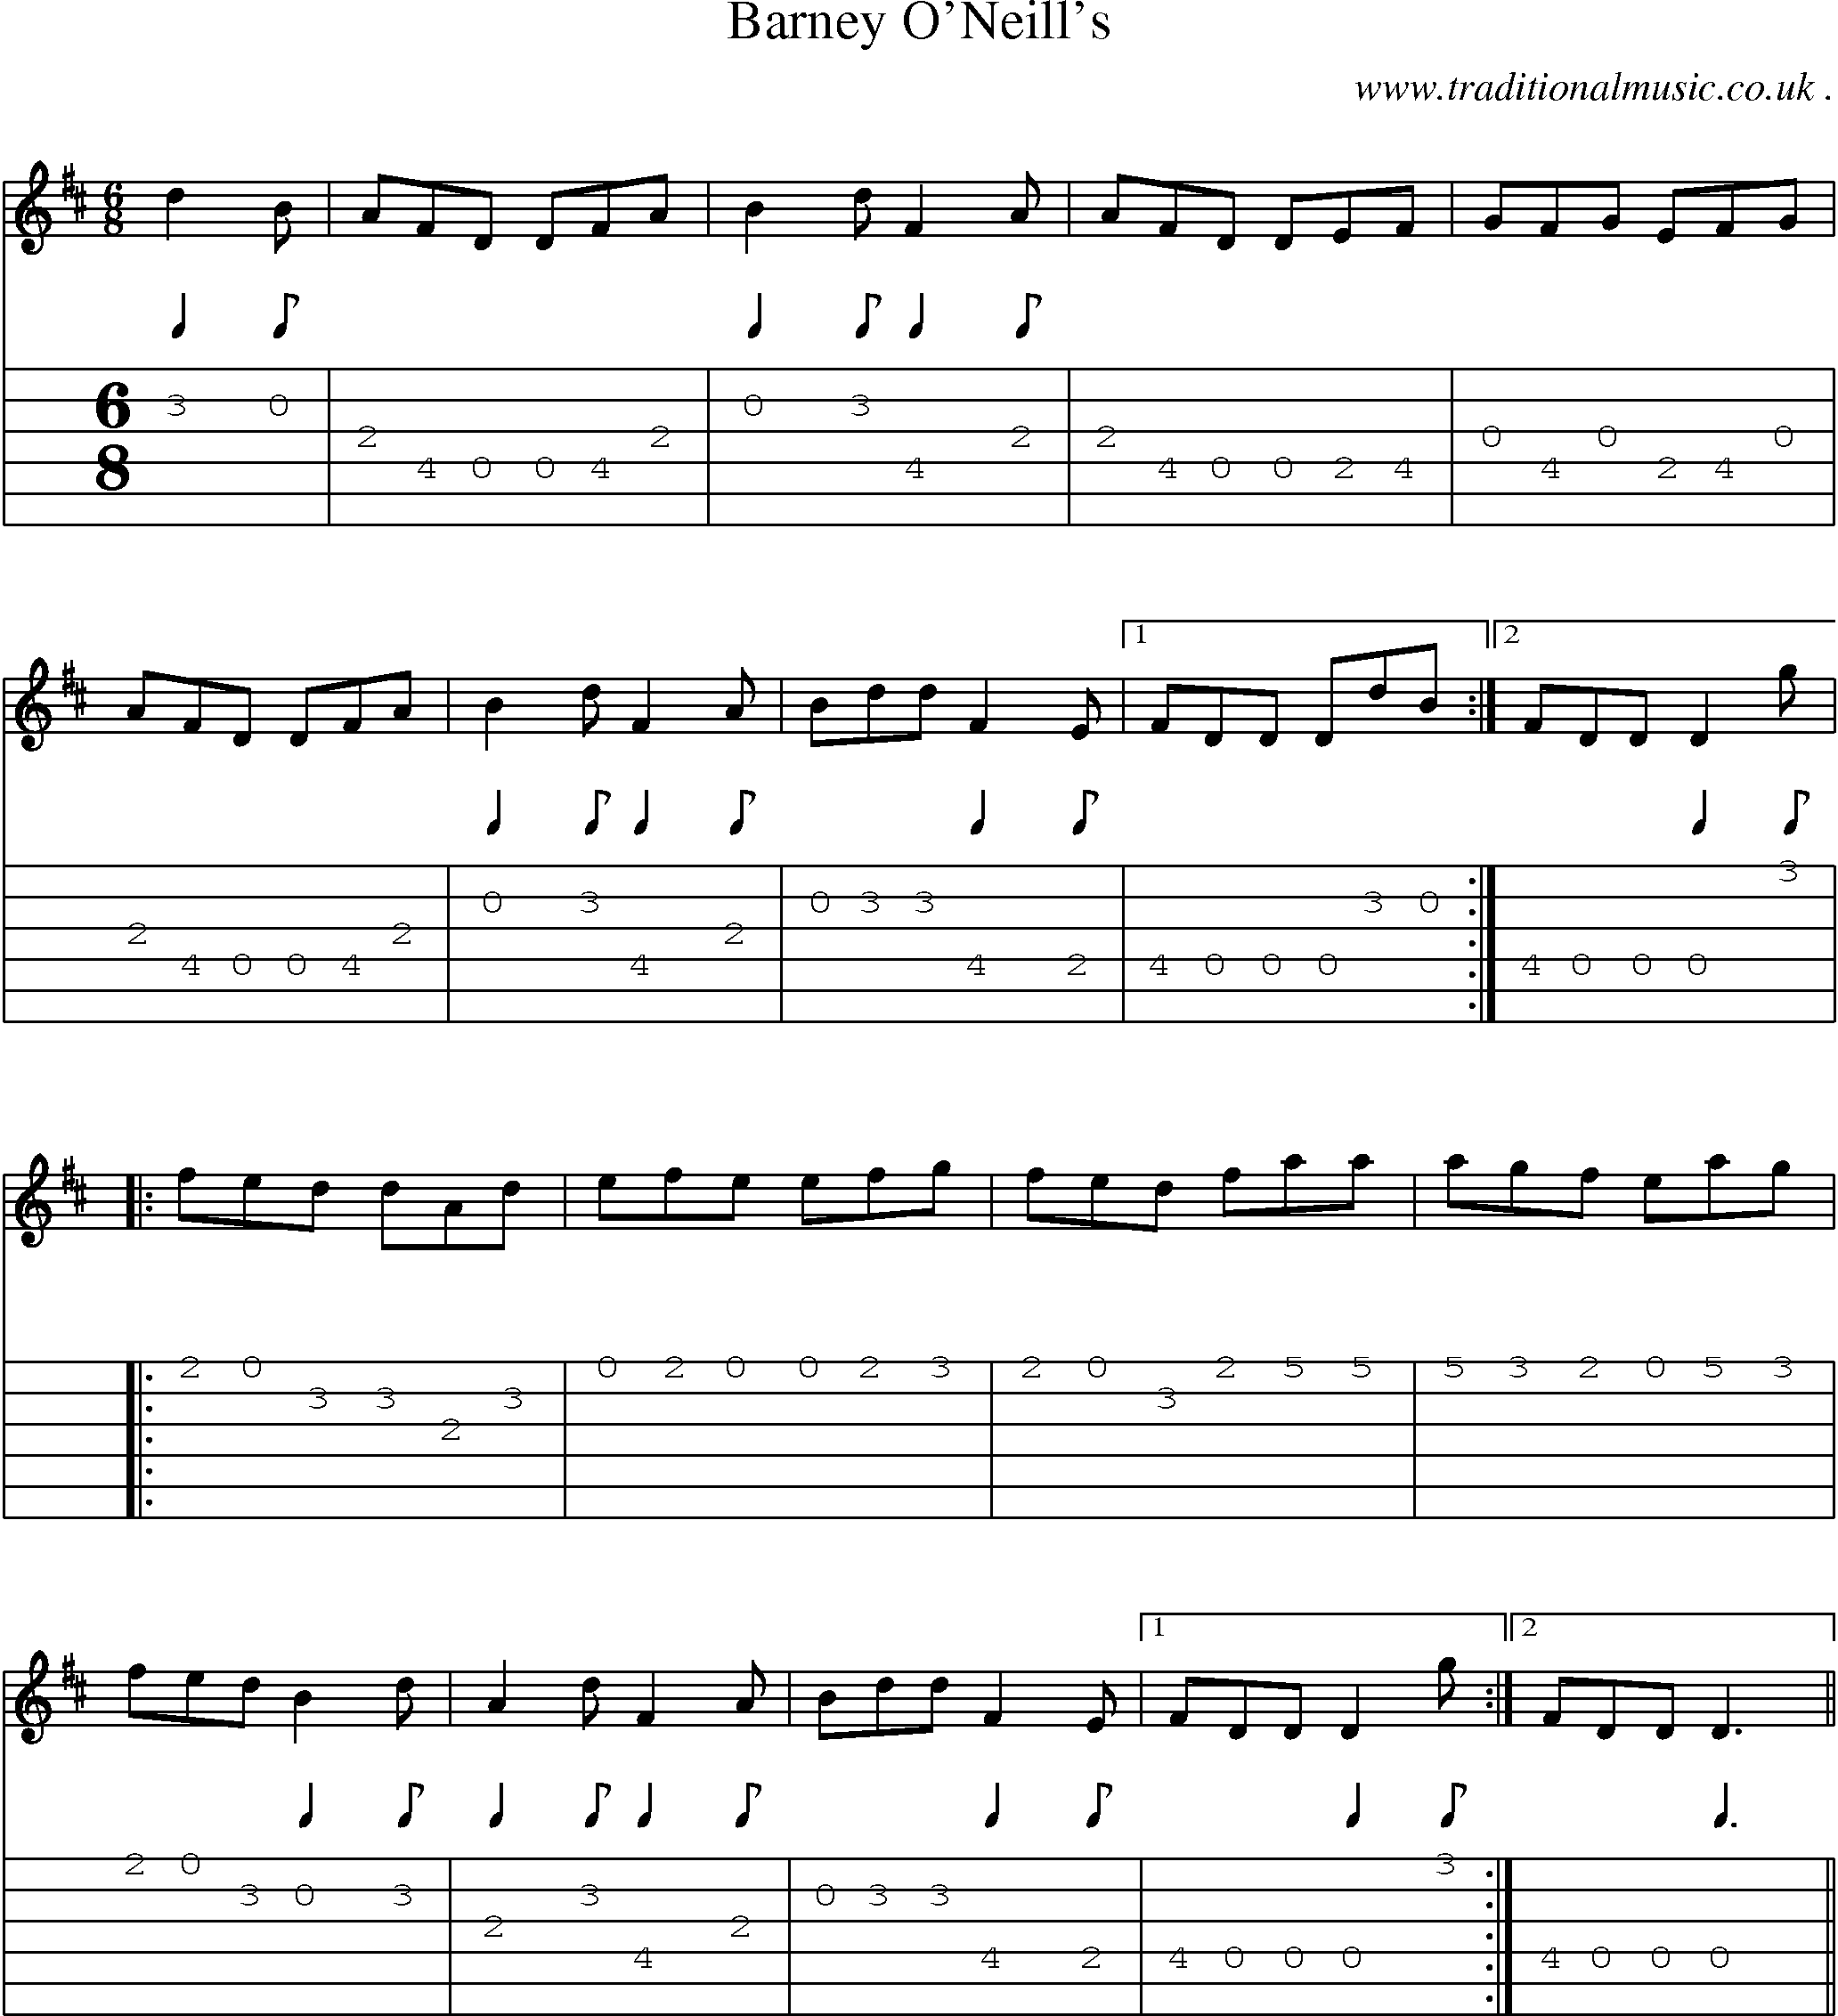 Sheet-Music and Guitar Tabs for Barney Oneills